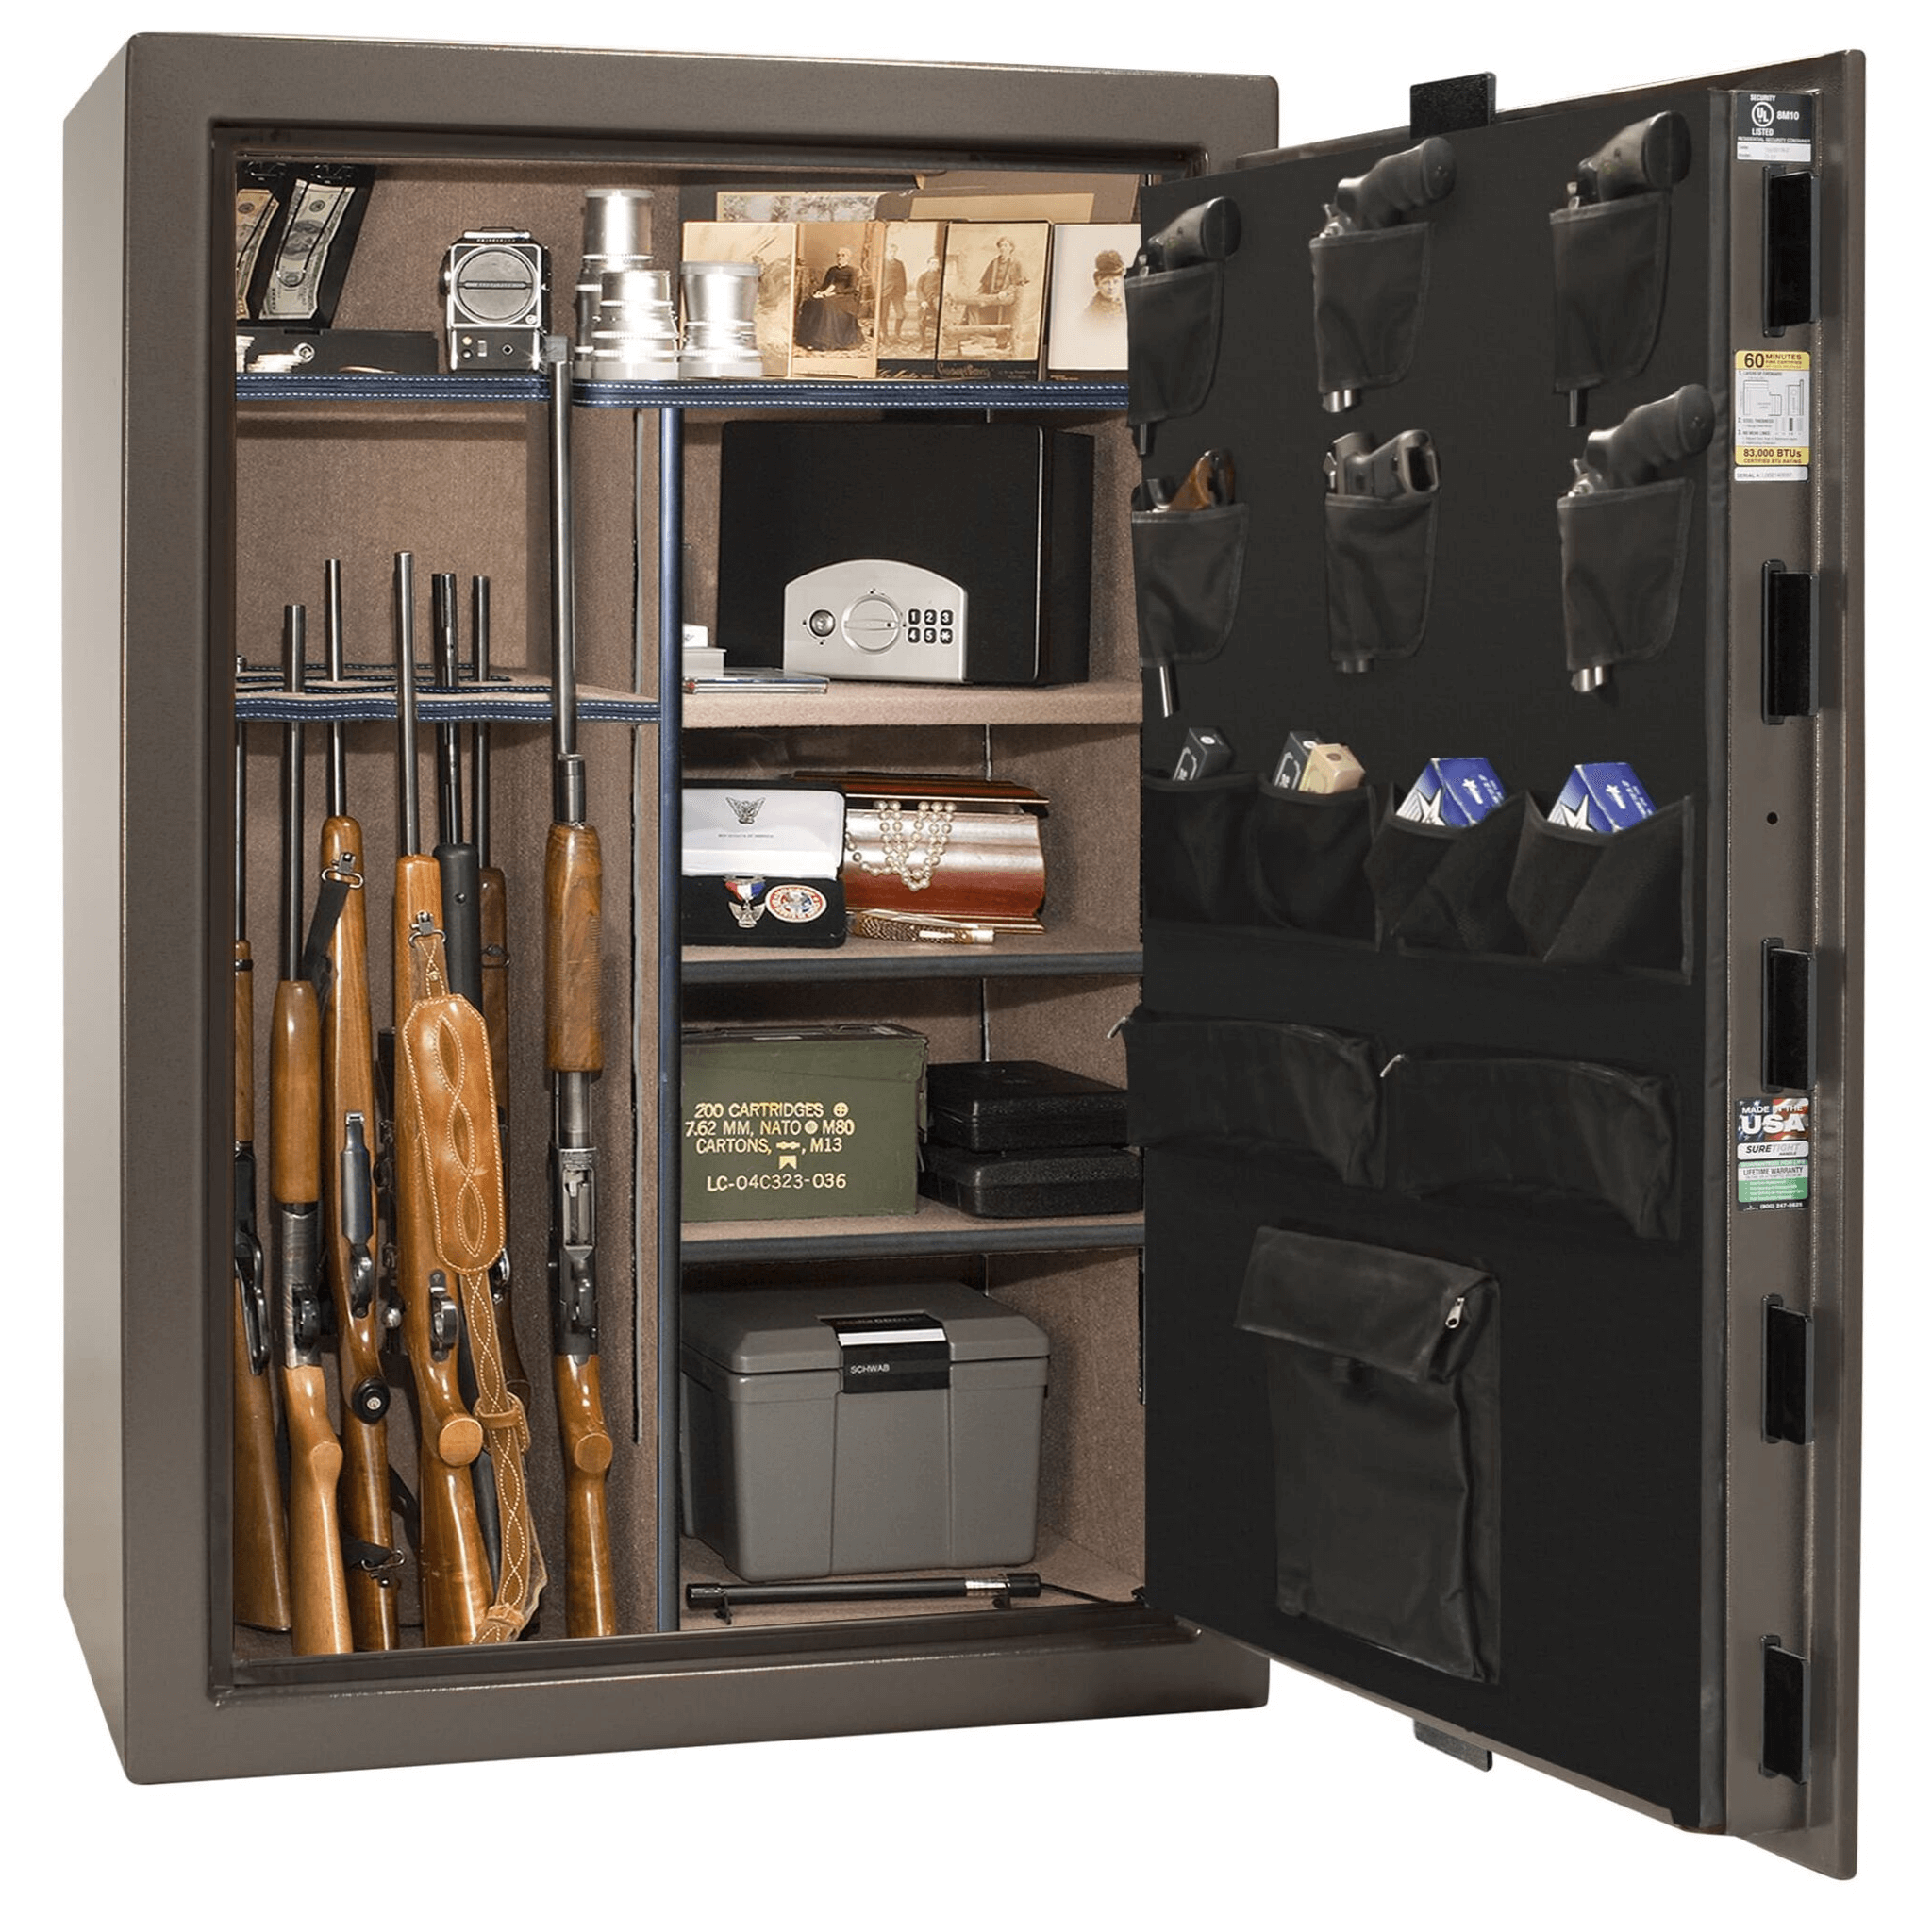 Fatboy Jr. Series | Level 3 Security | 75 Minute Fire Protection | 48XT | Dimensions: 60.5"(H) x 42"(W) x 25"(D) | Extreme 6 in 1 Flex Interior | Bronze Textured | Mechanical Lock, photo 28